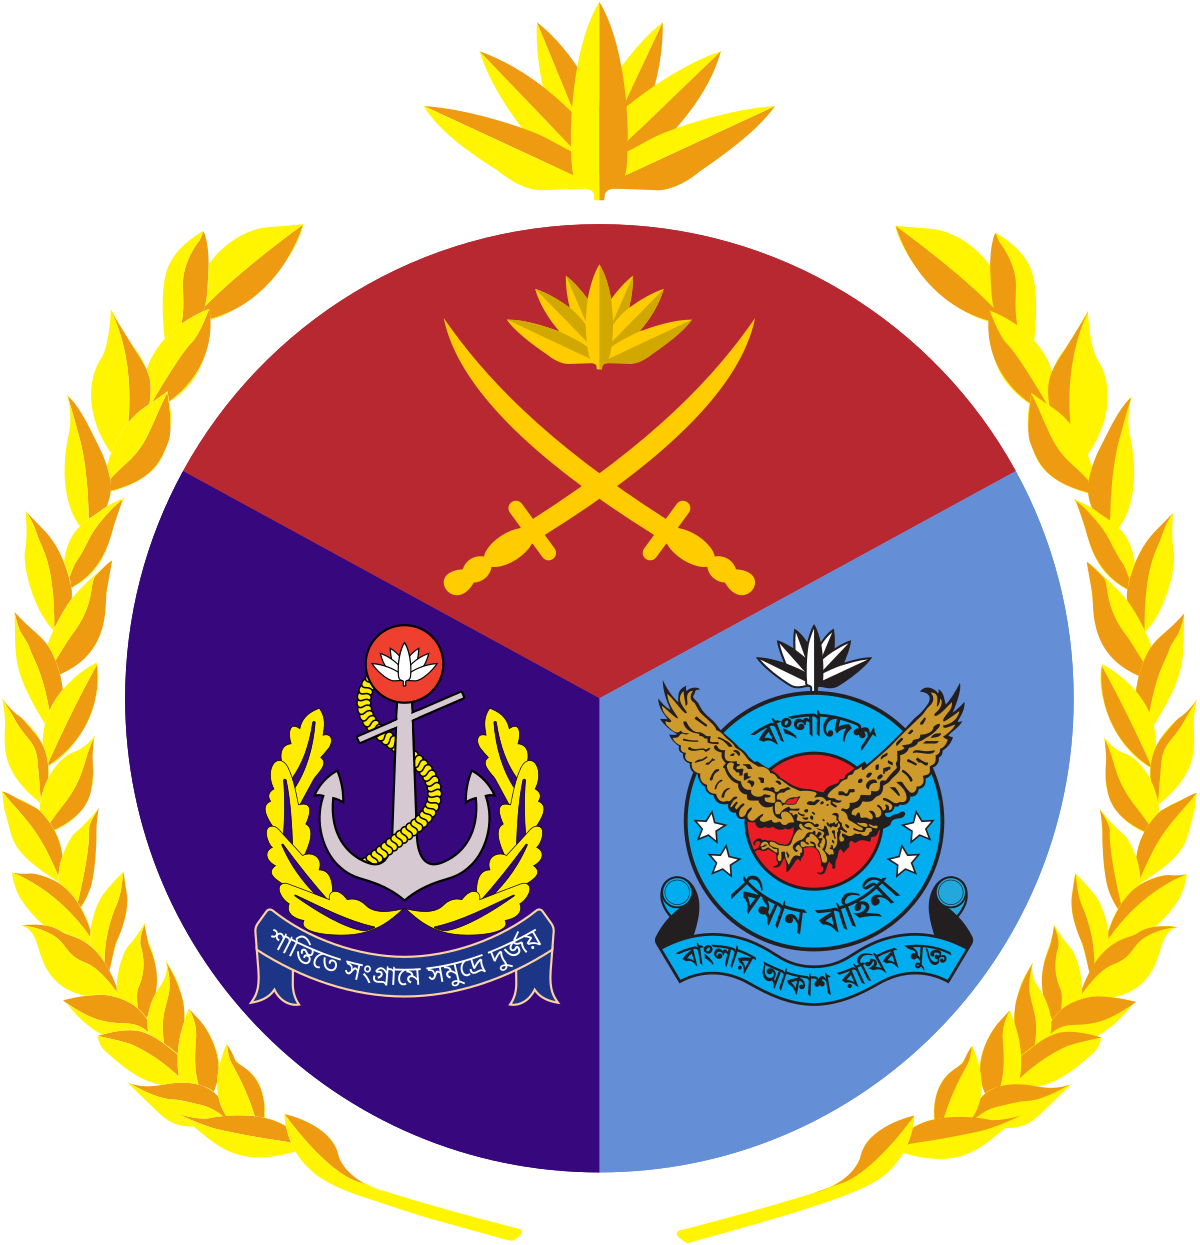 Bangladesh Armed Forces Division